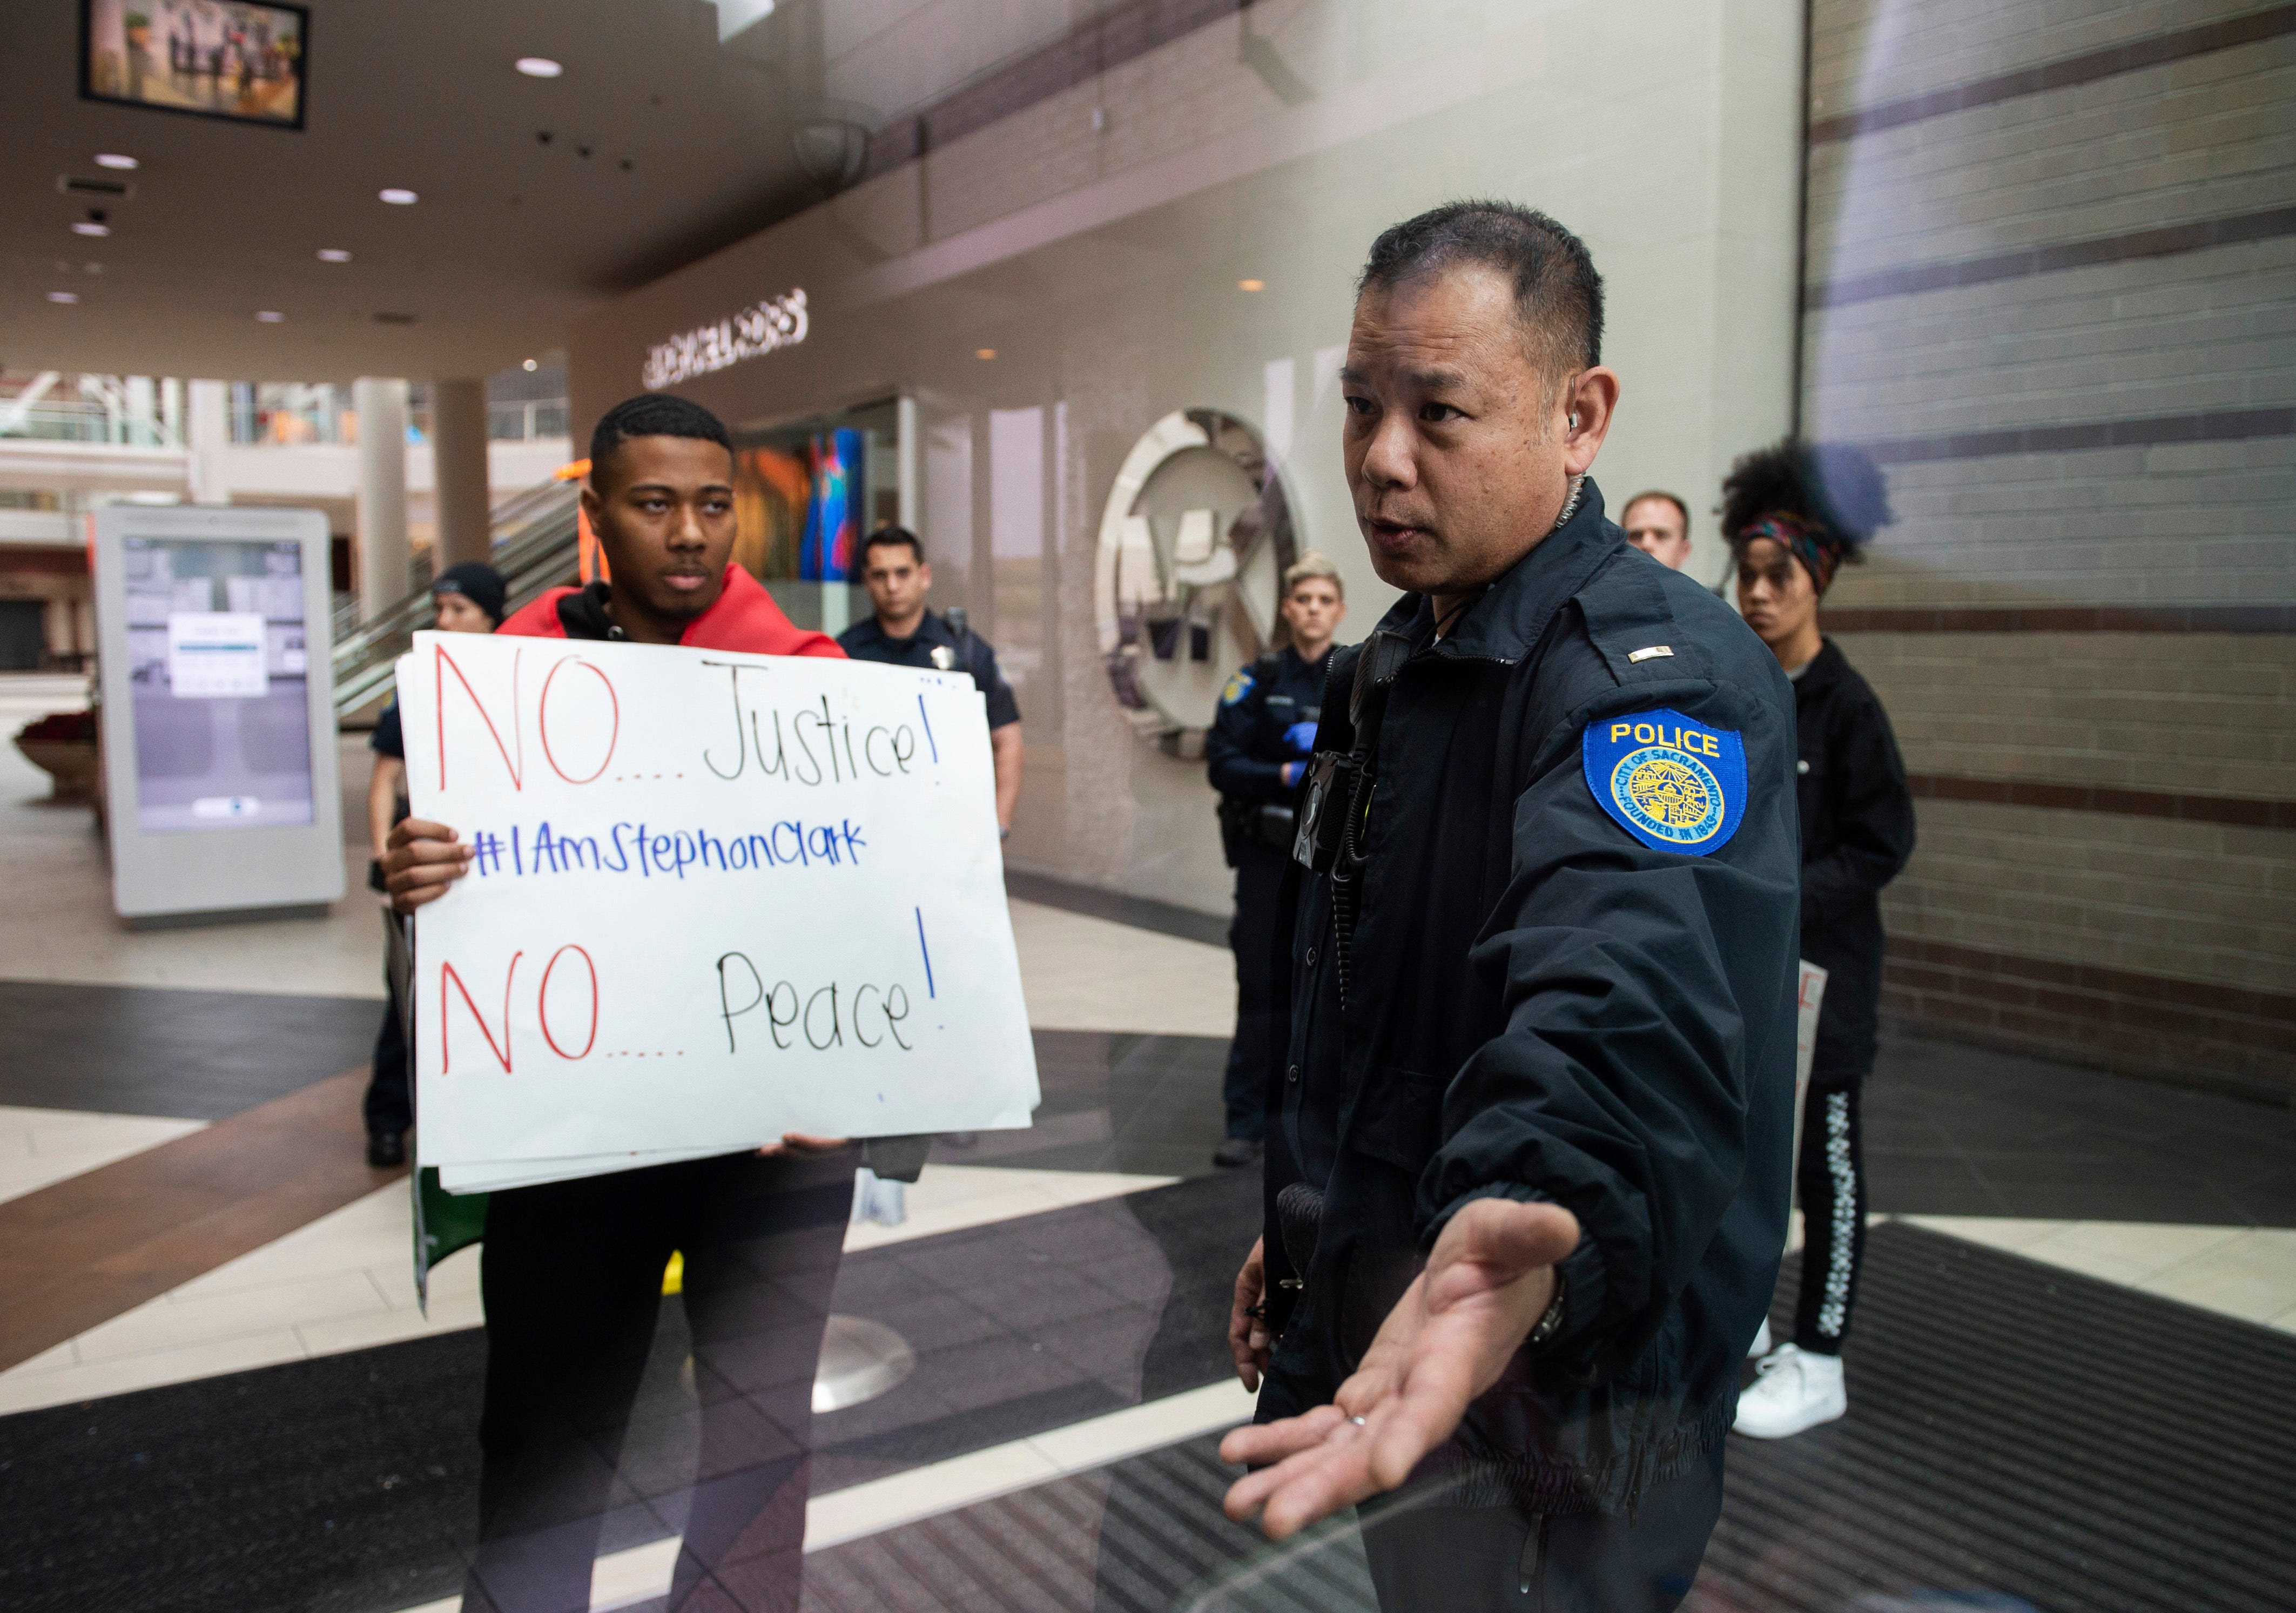 Sacramento Police officers escort protesters from the Arden Fair Mall after they staged an overnight sit-in for Stephon Clark, who was killed by police, in Sacramento, Calif., Sunday, March 3, 2019, following the Sacramento District Attorney's decision not to charge officers involved in last year's shooting of Clark. 